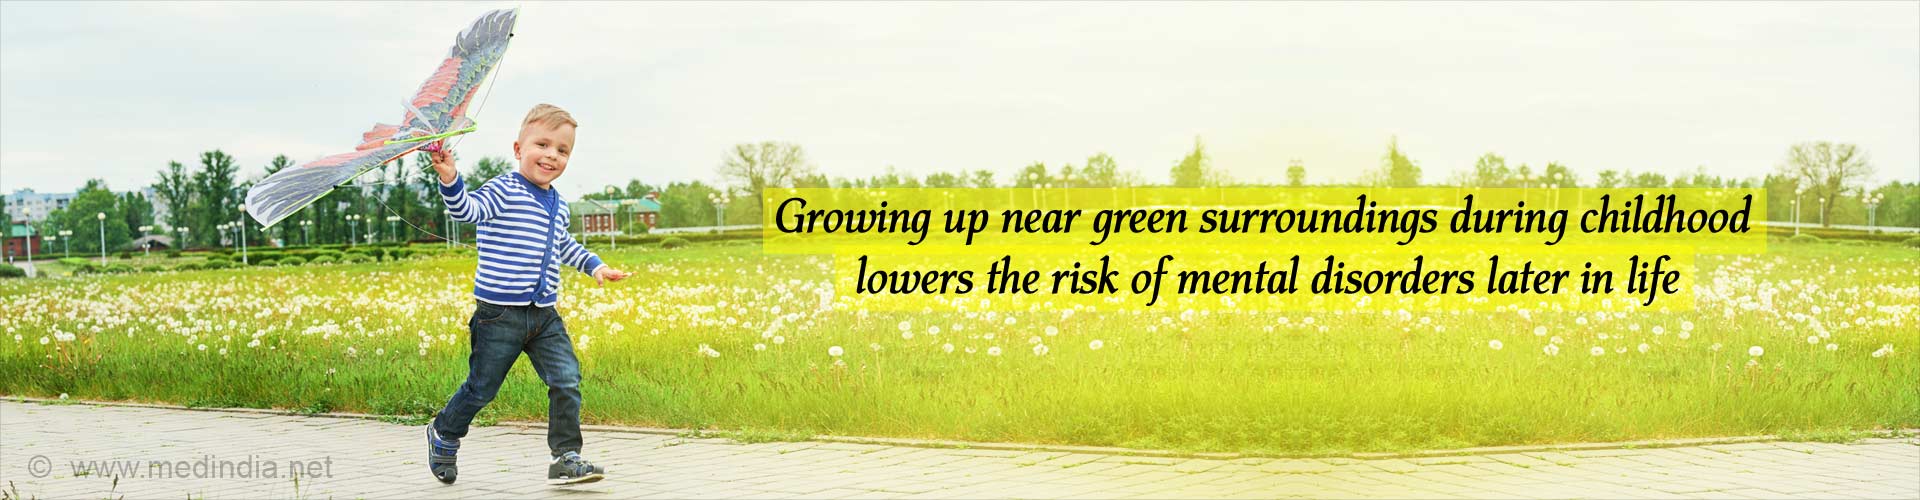 Growing up near green surroundings during childhood lowers the risk of mental disorders later in life.